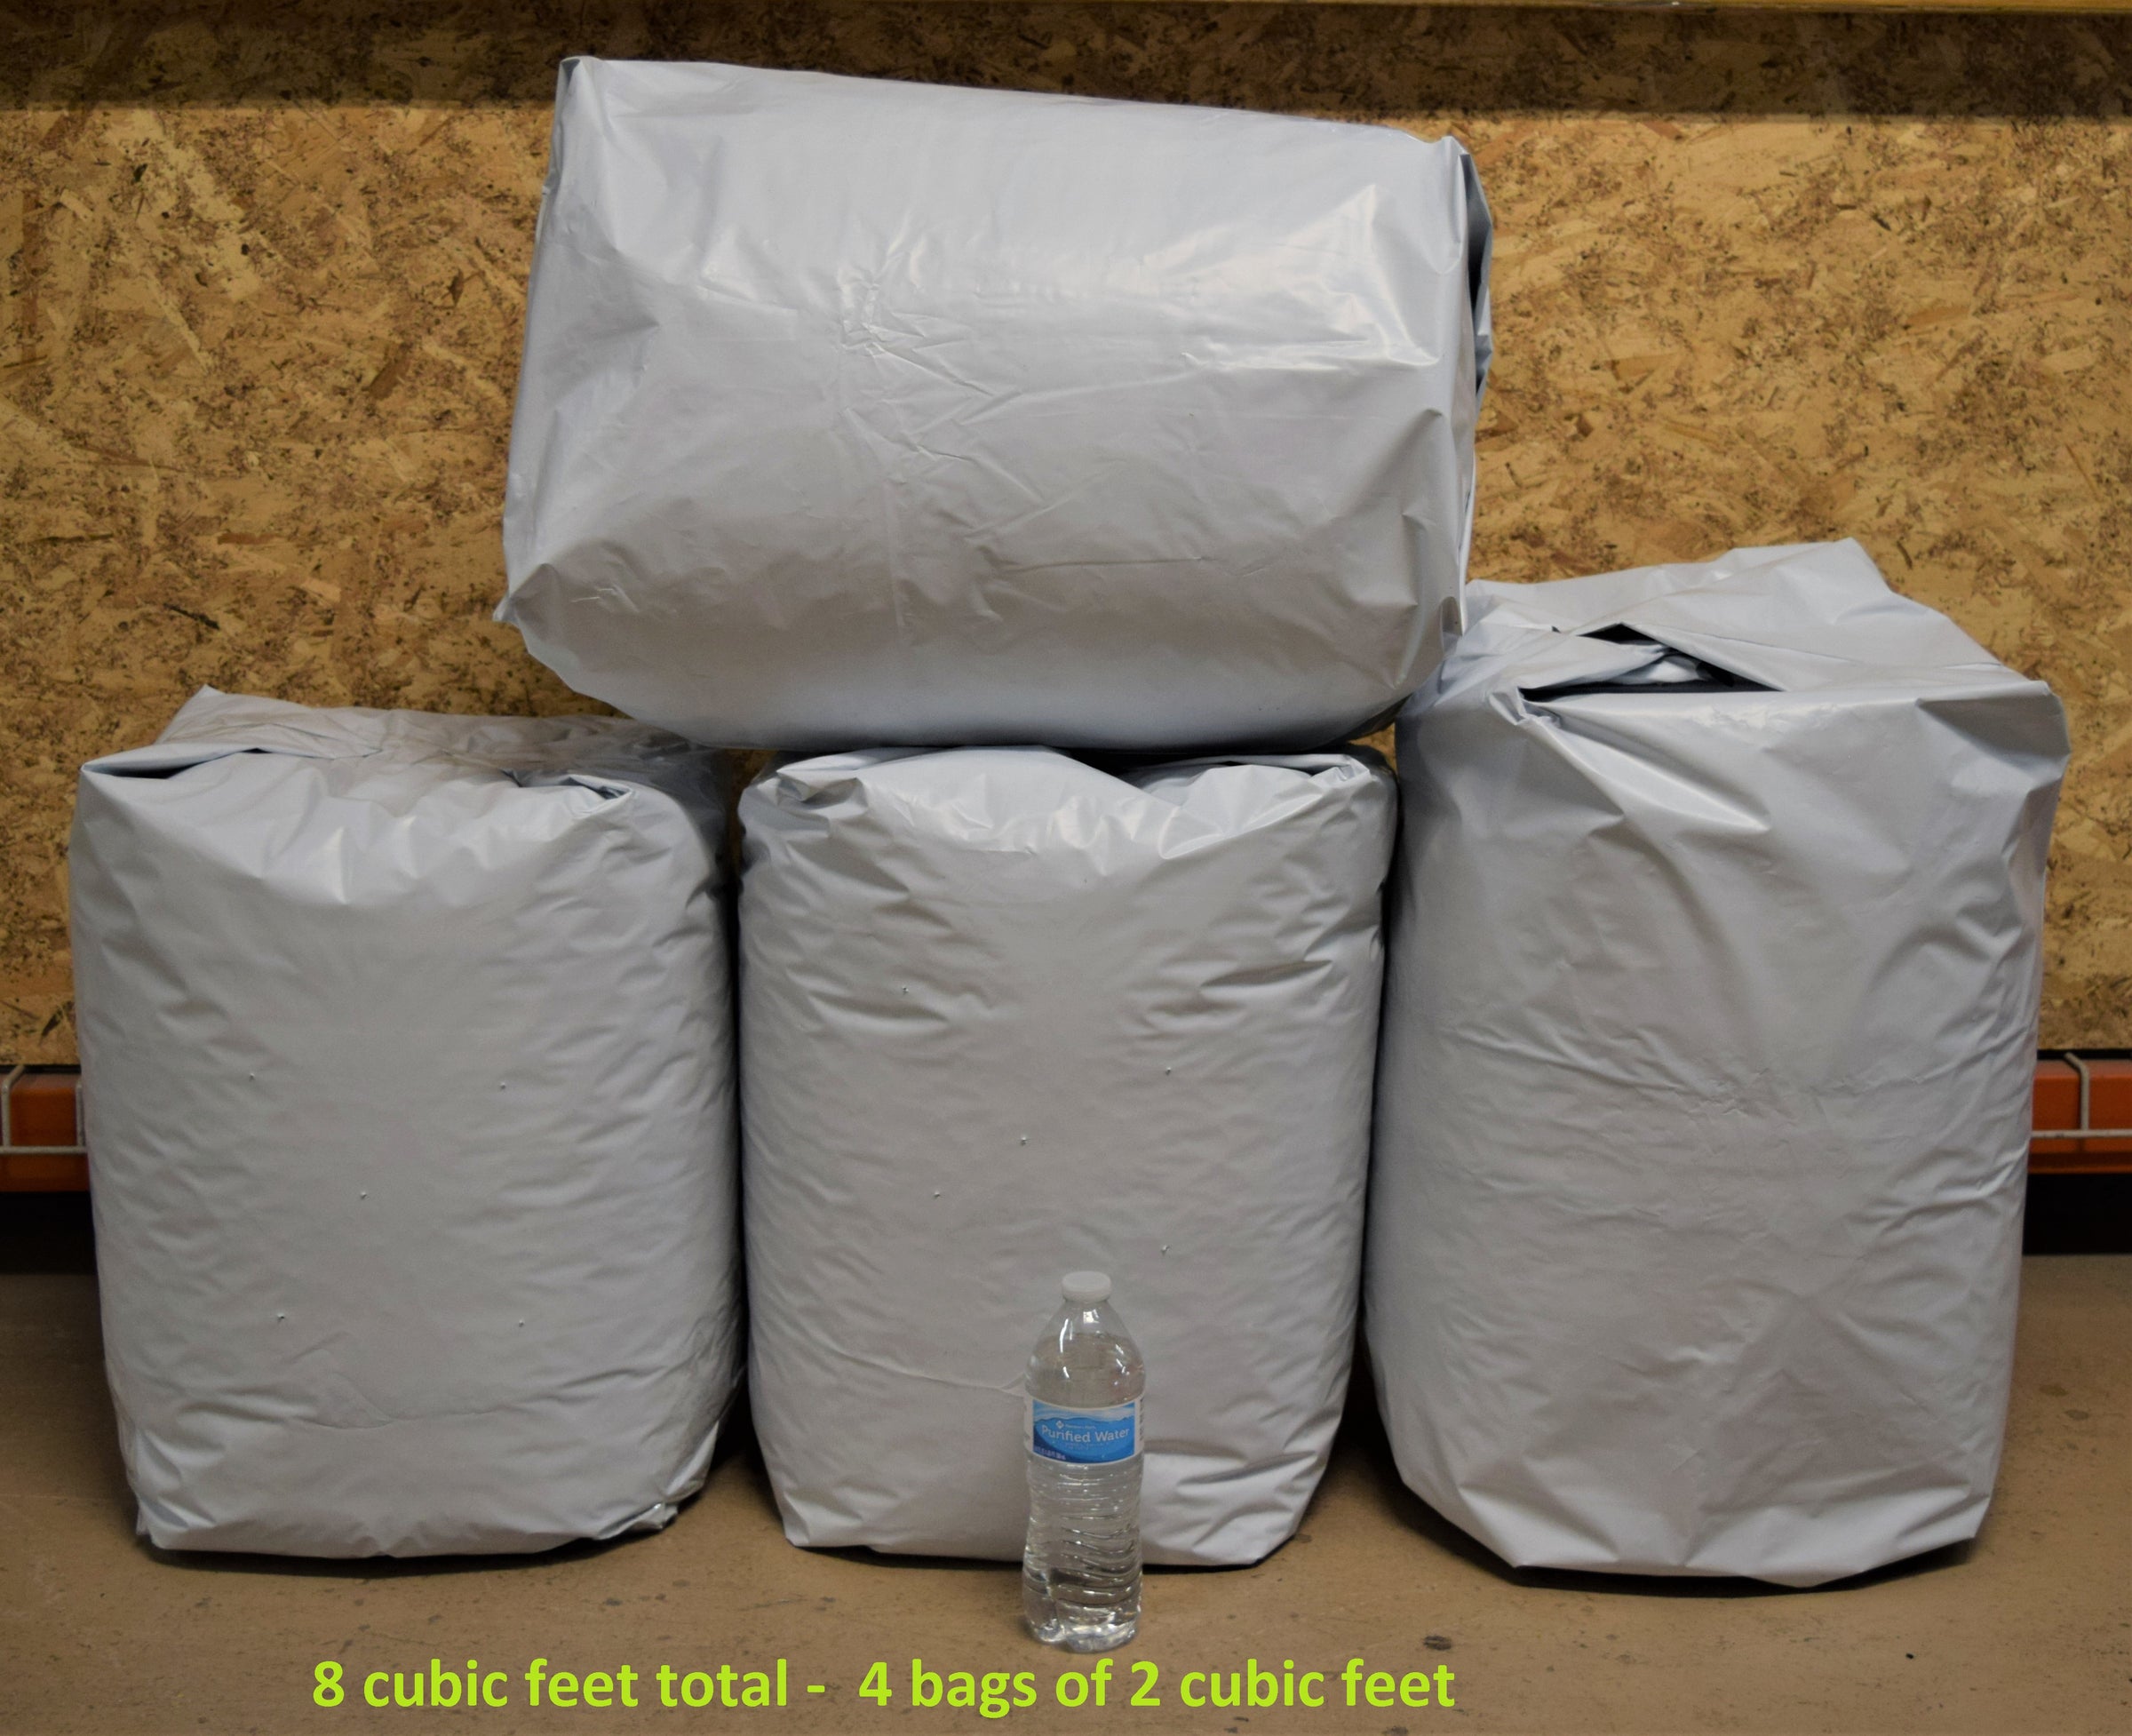 FREE DELIVERY - 100 Litre Bean Bag Refill Beans Polystyrene Beads